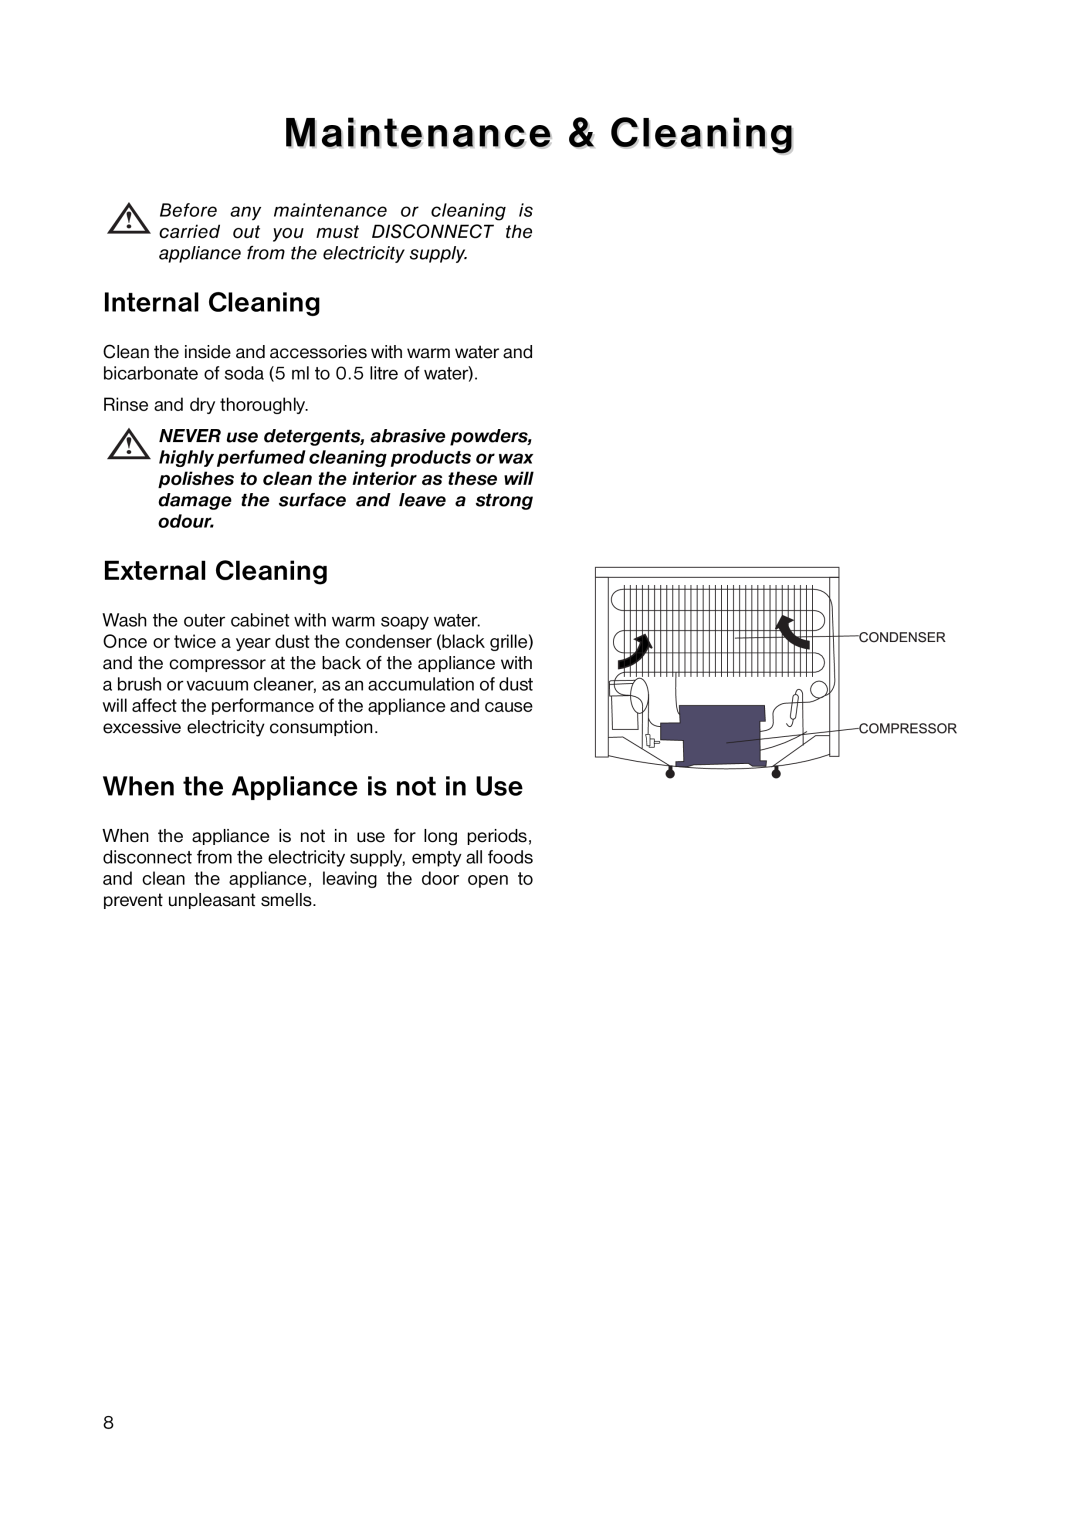 Zanussi ZEUC 0545 manual Maintenance & Cleaning, Internal Cleaning, External Cleaning, When the Appliance is not in Use 